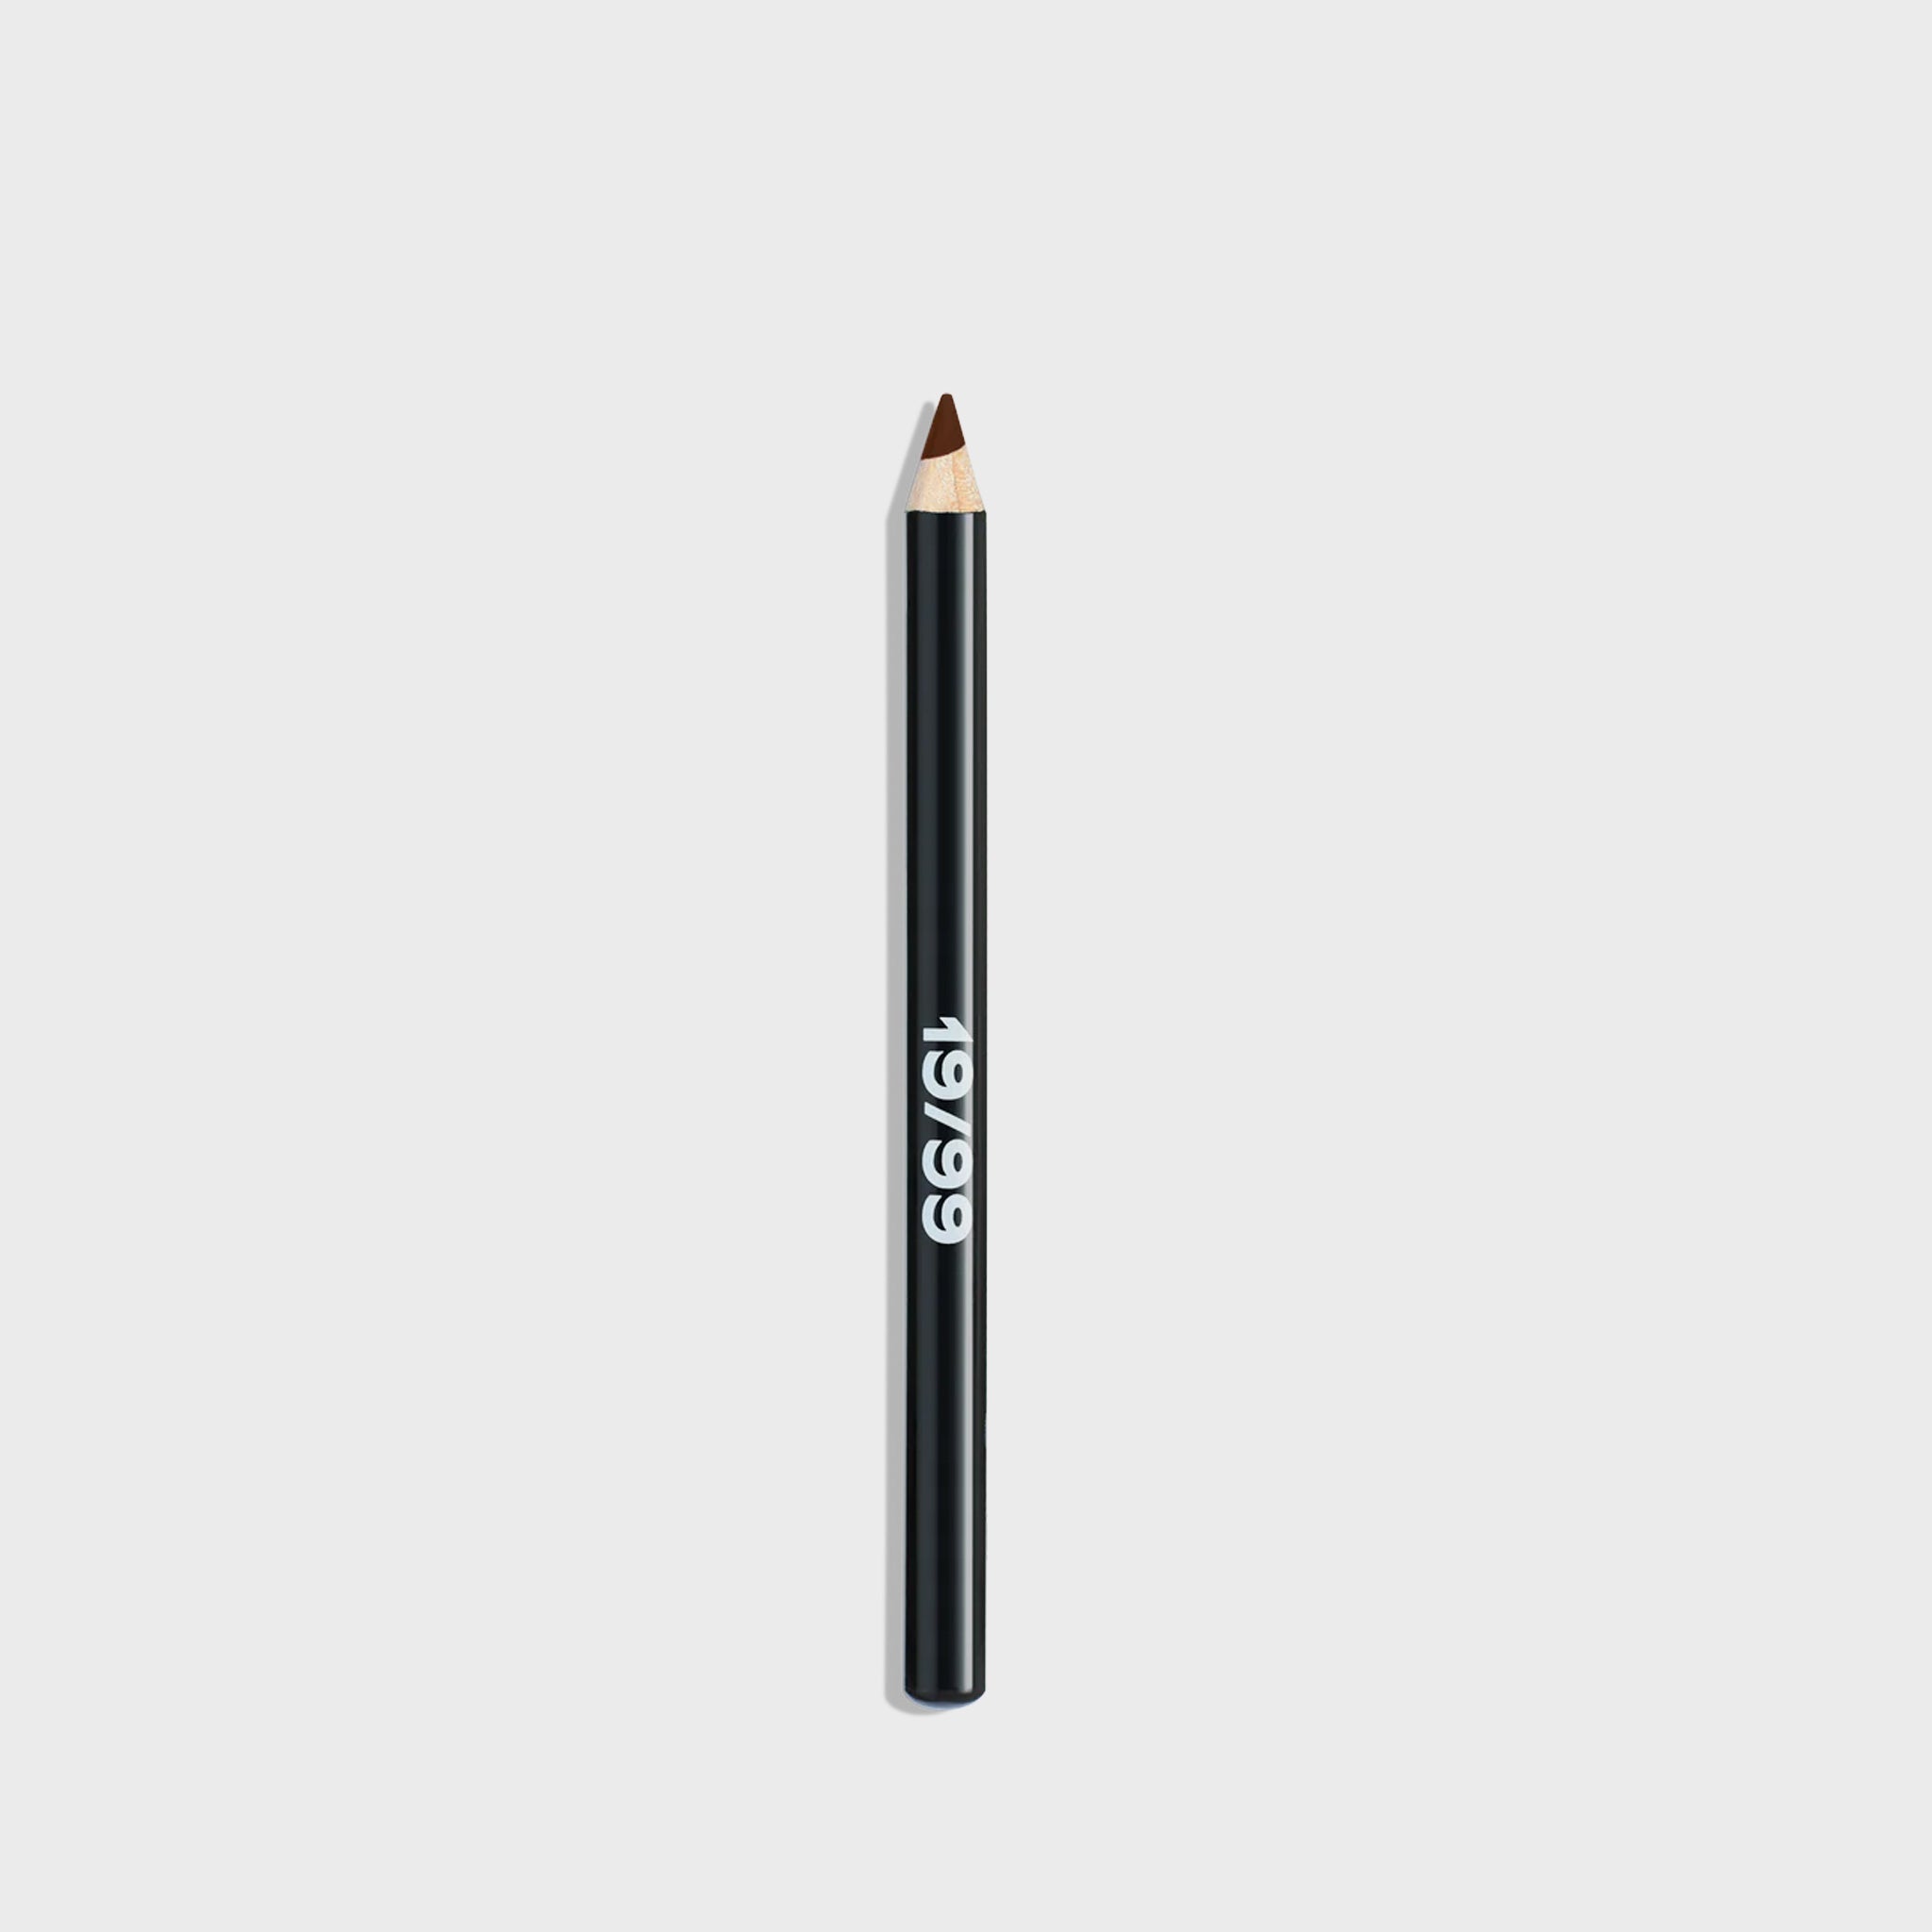 Makeup pencil in chocolate brown by 19/99, with a black casing and bold 19/99 logo printed on the side of the pencil.